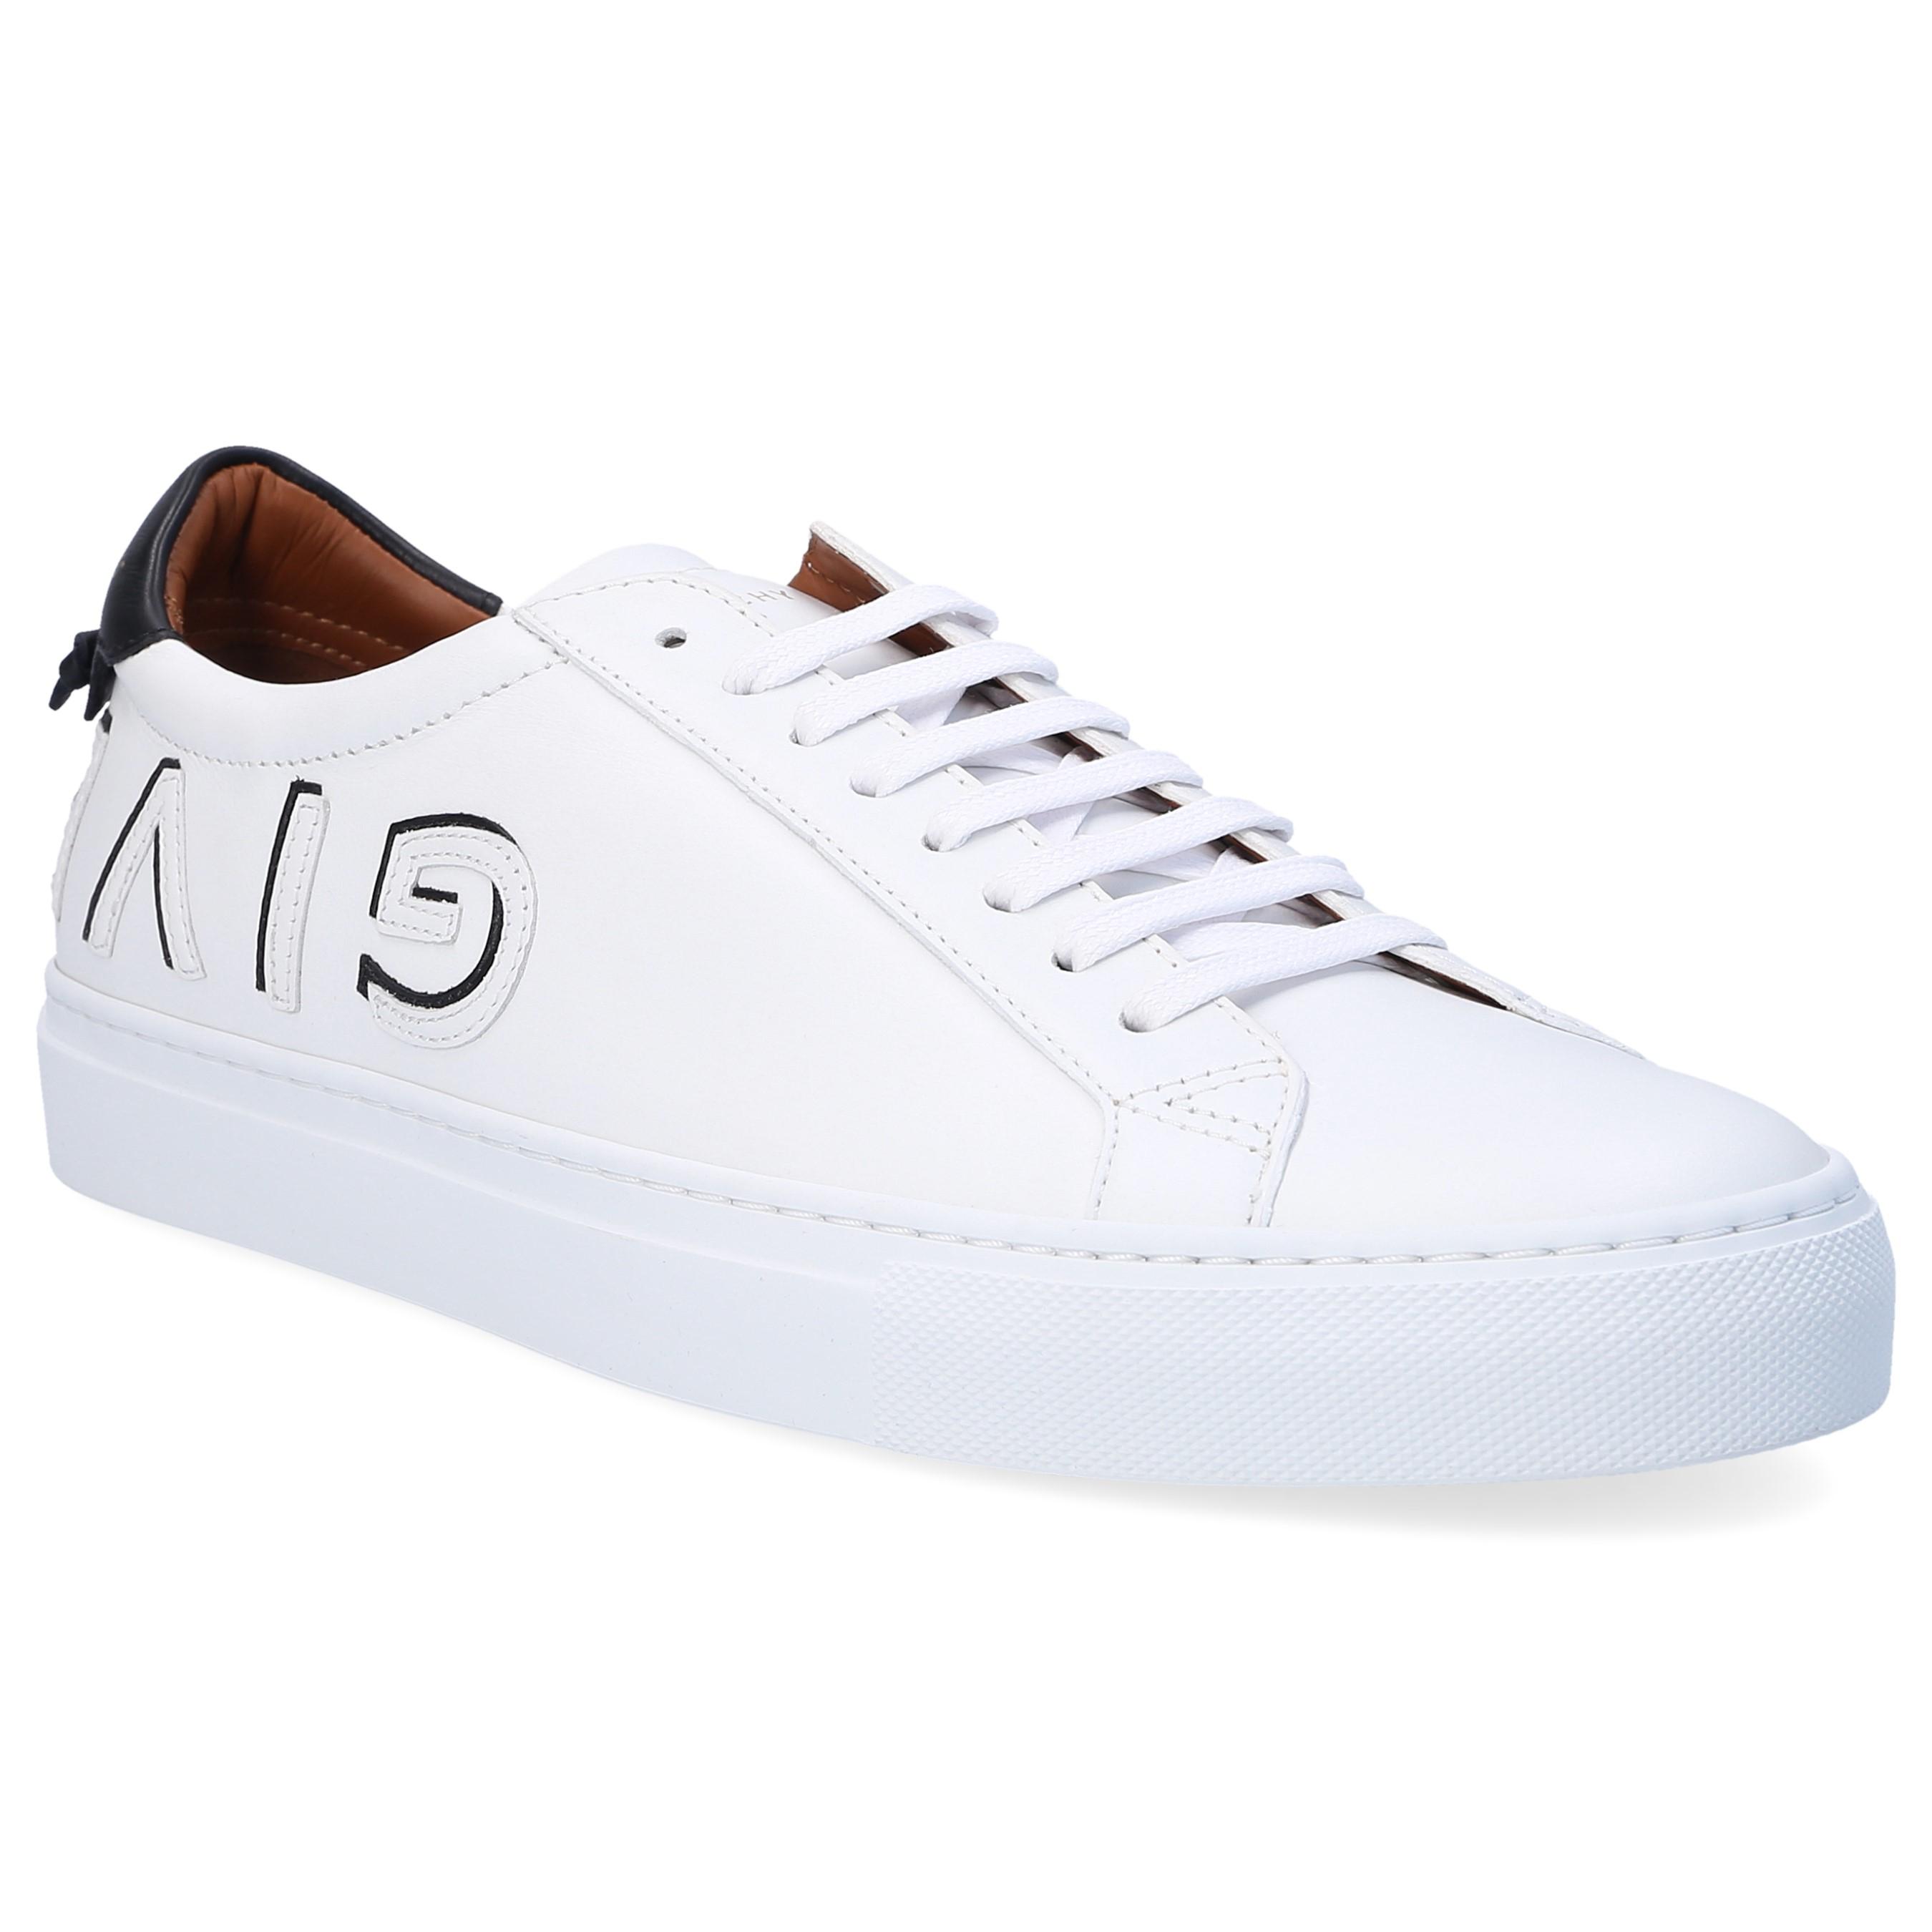 Givenchy Leather Sneakers White Urban Street for Men - Lyst